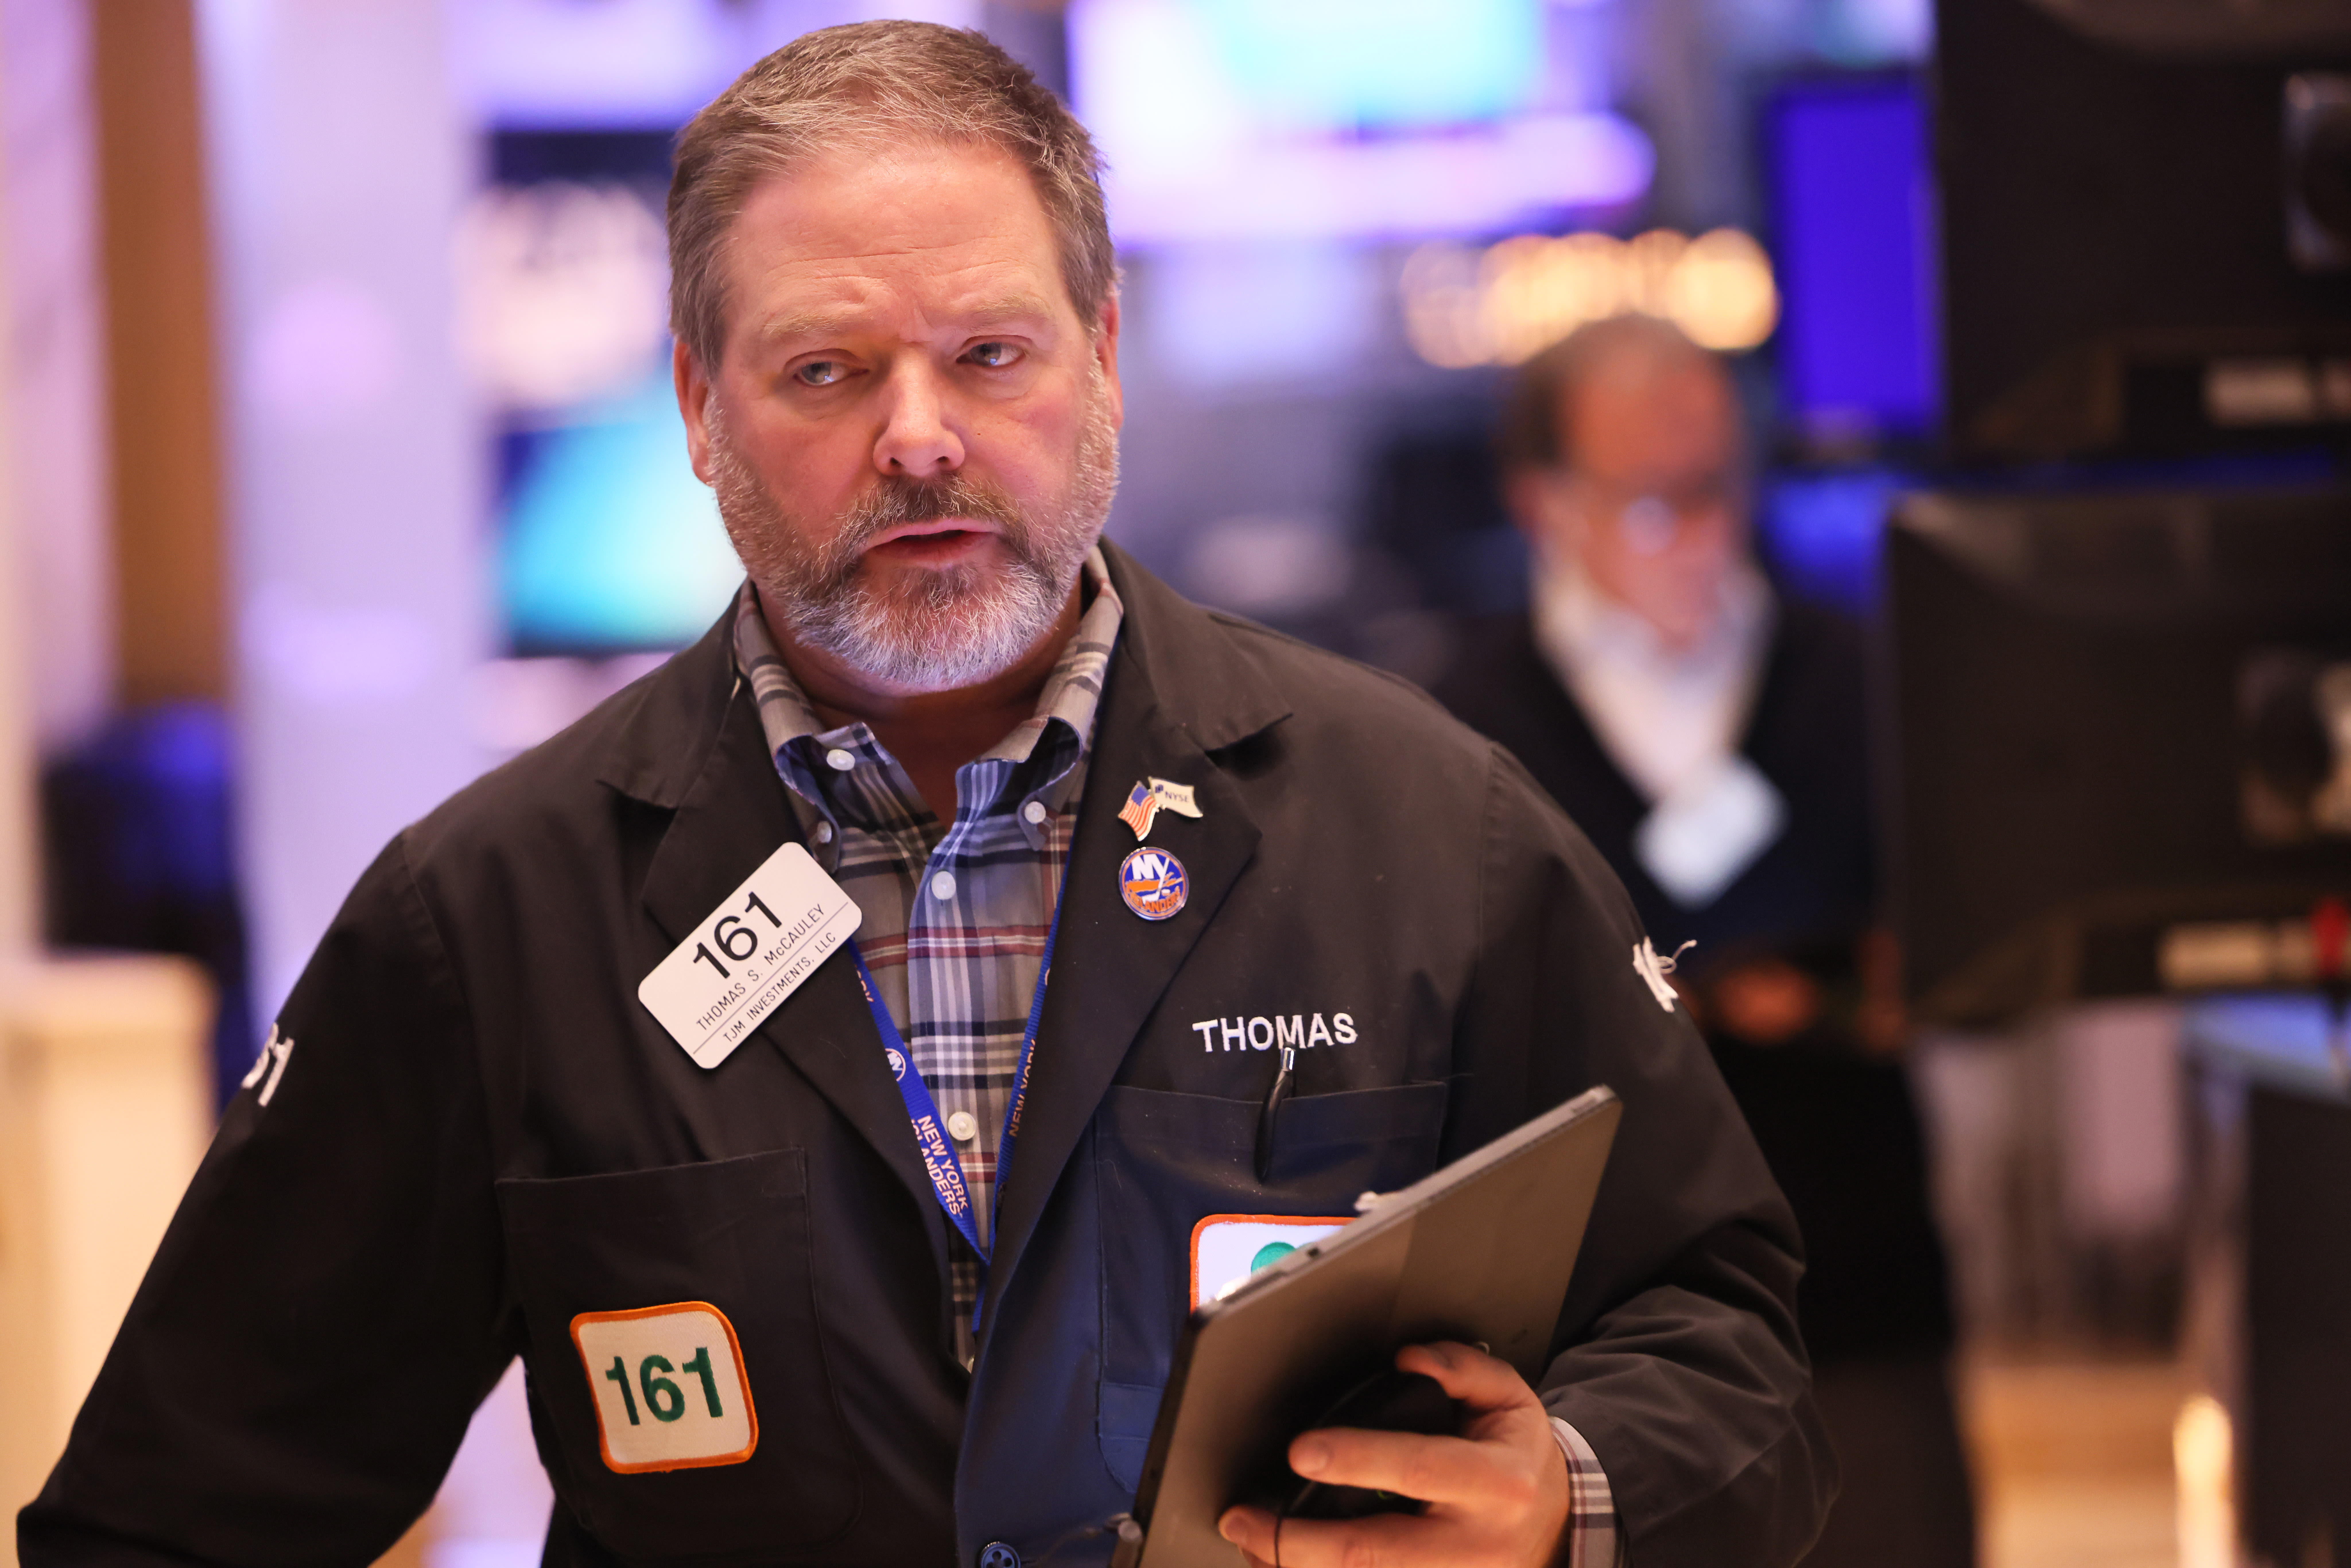 Stock market news today: Nasdaq, S&P 500 slide into the close, capping volatile day on Wall Street